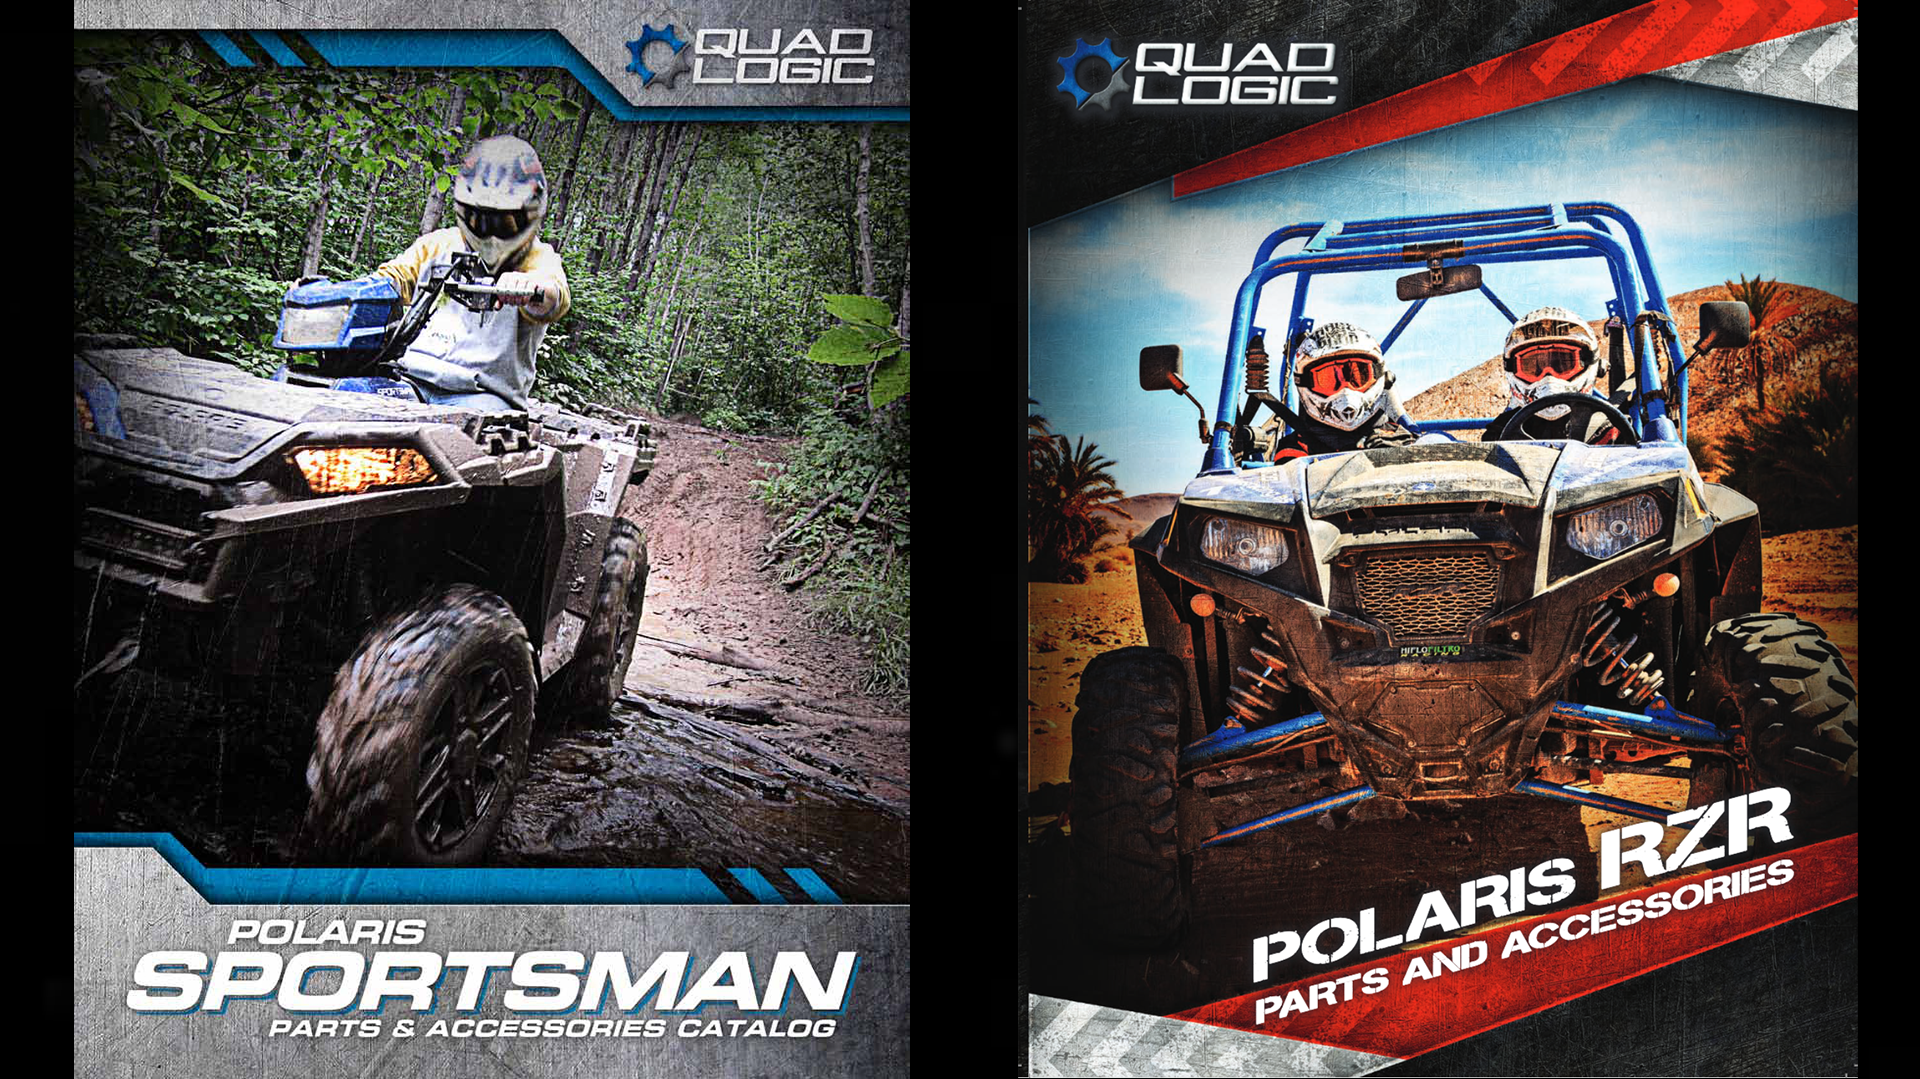 Free Polaris Sportsman and Polaris RZR parts and accessories booklet. ATV aftermarket and stock parts and accessories. 